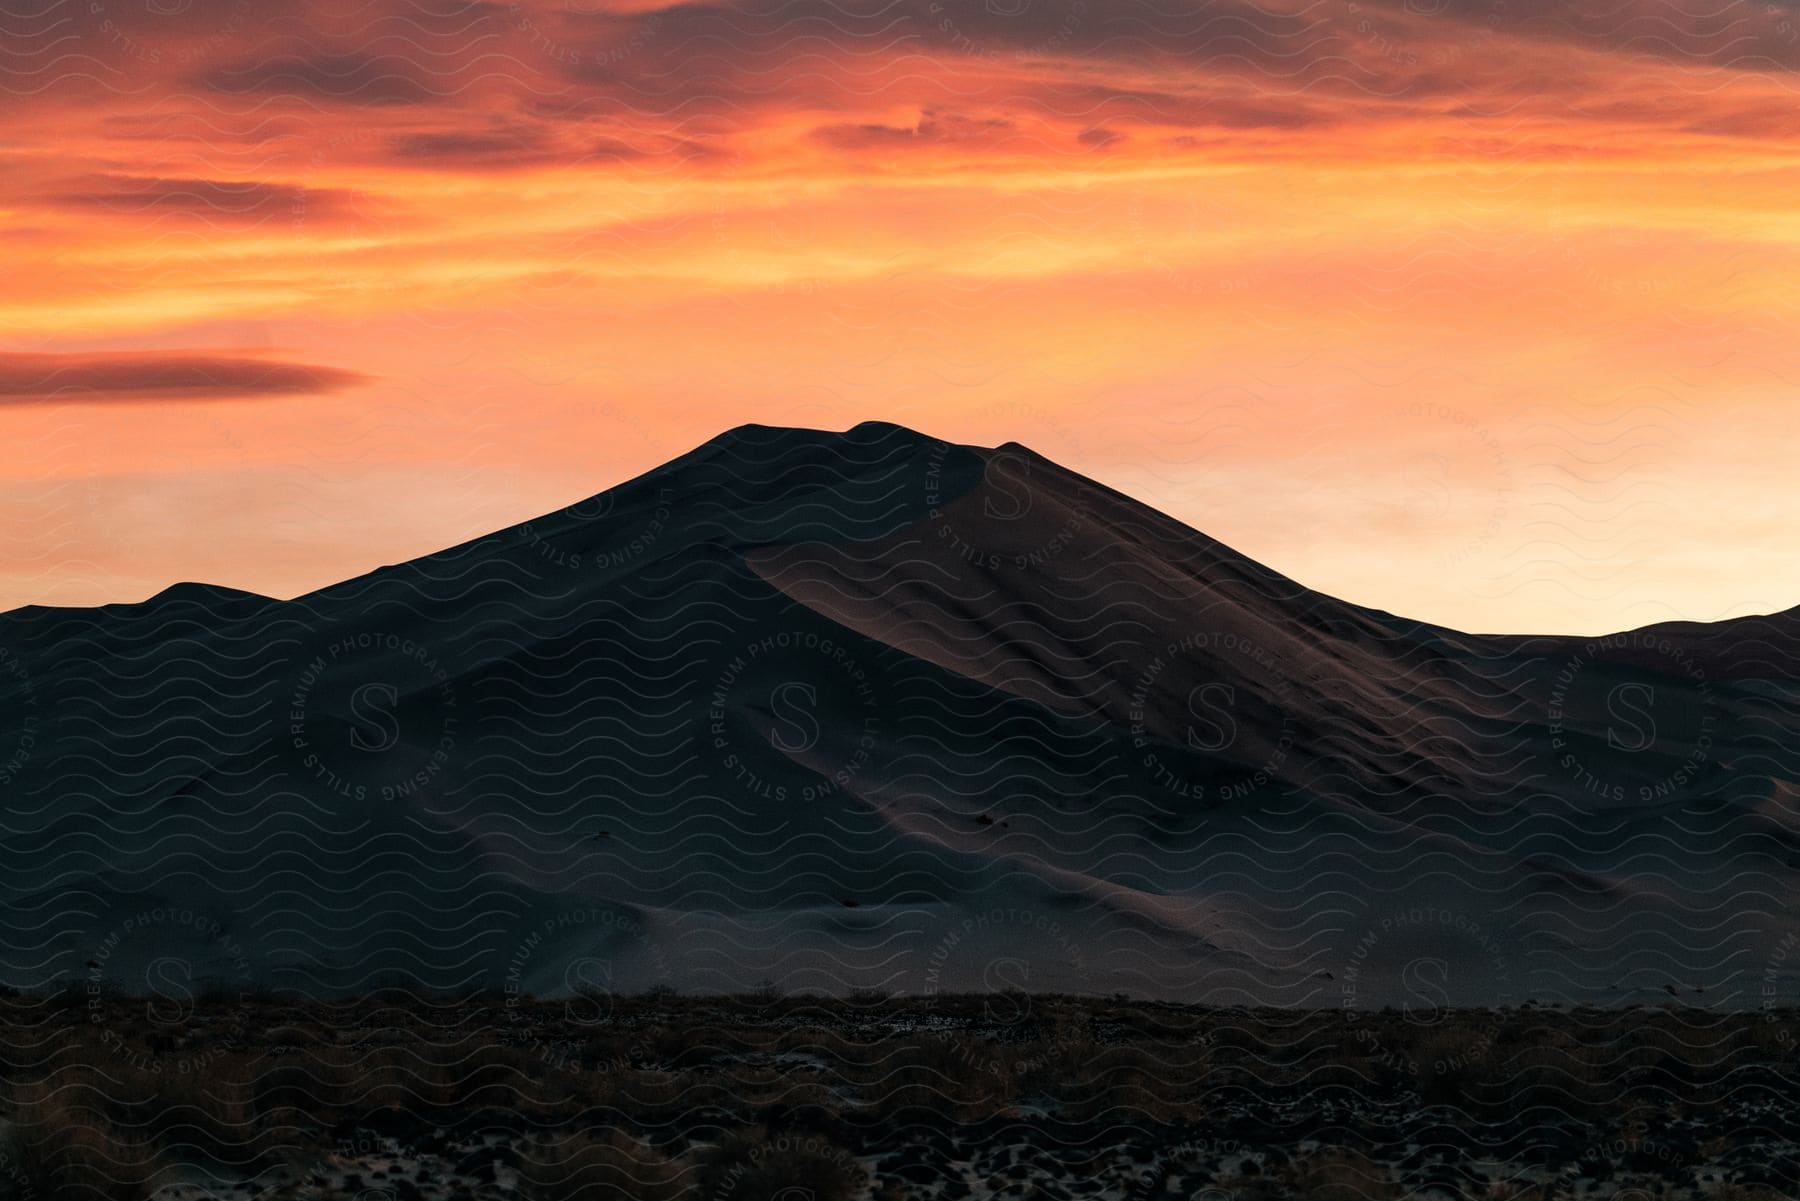 A sand dune rises under a red sky